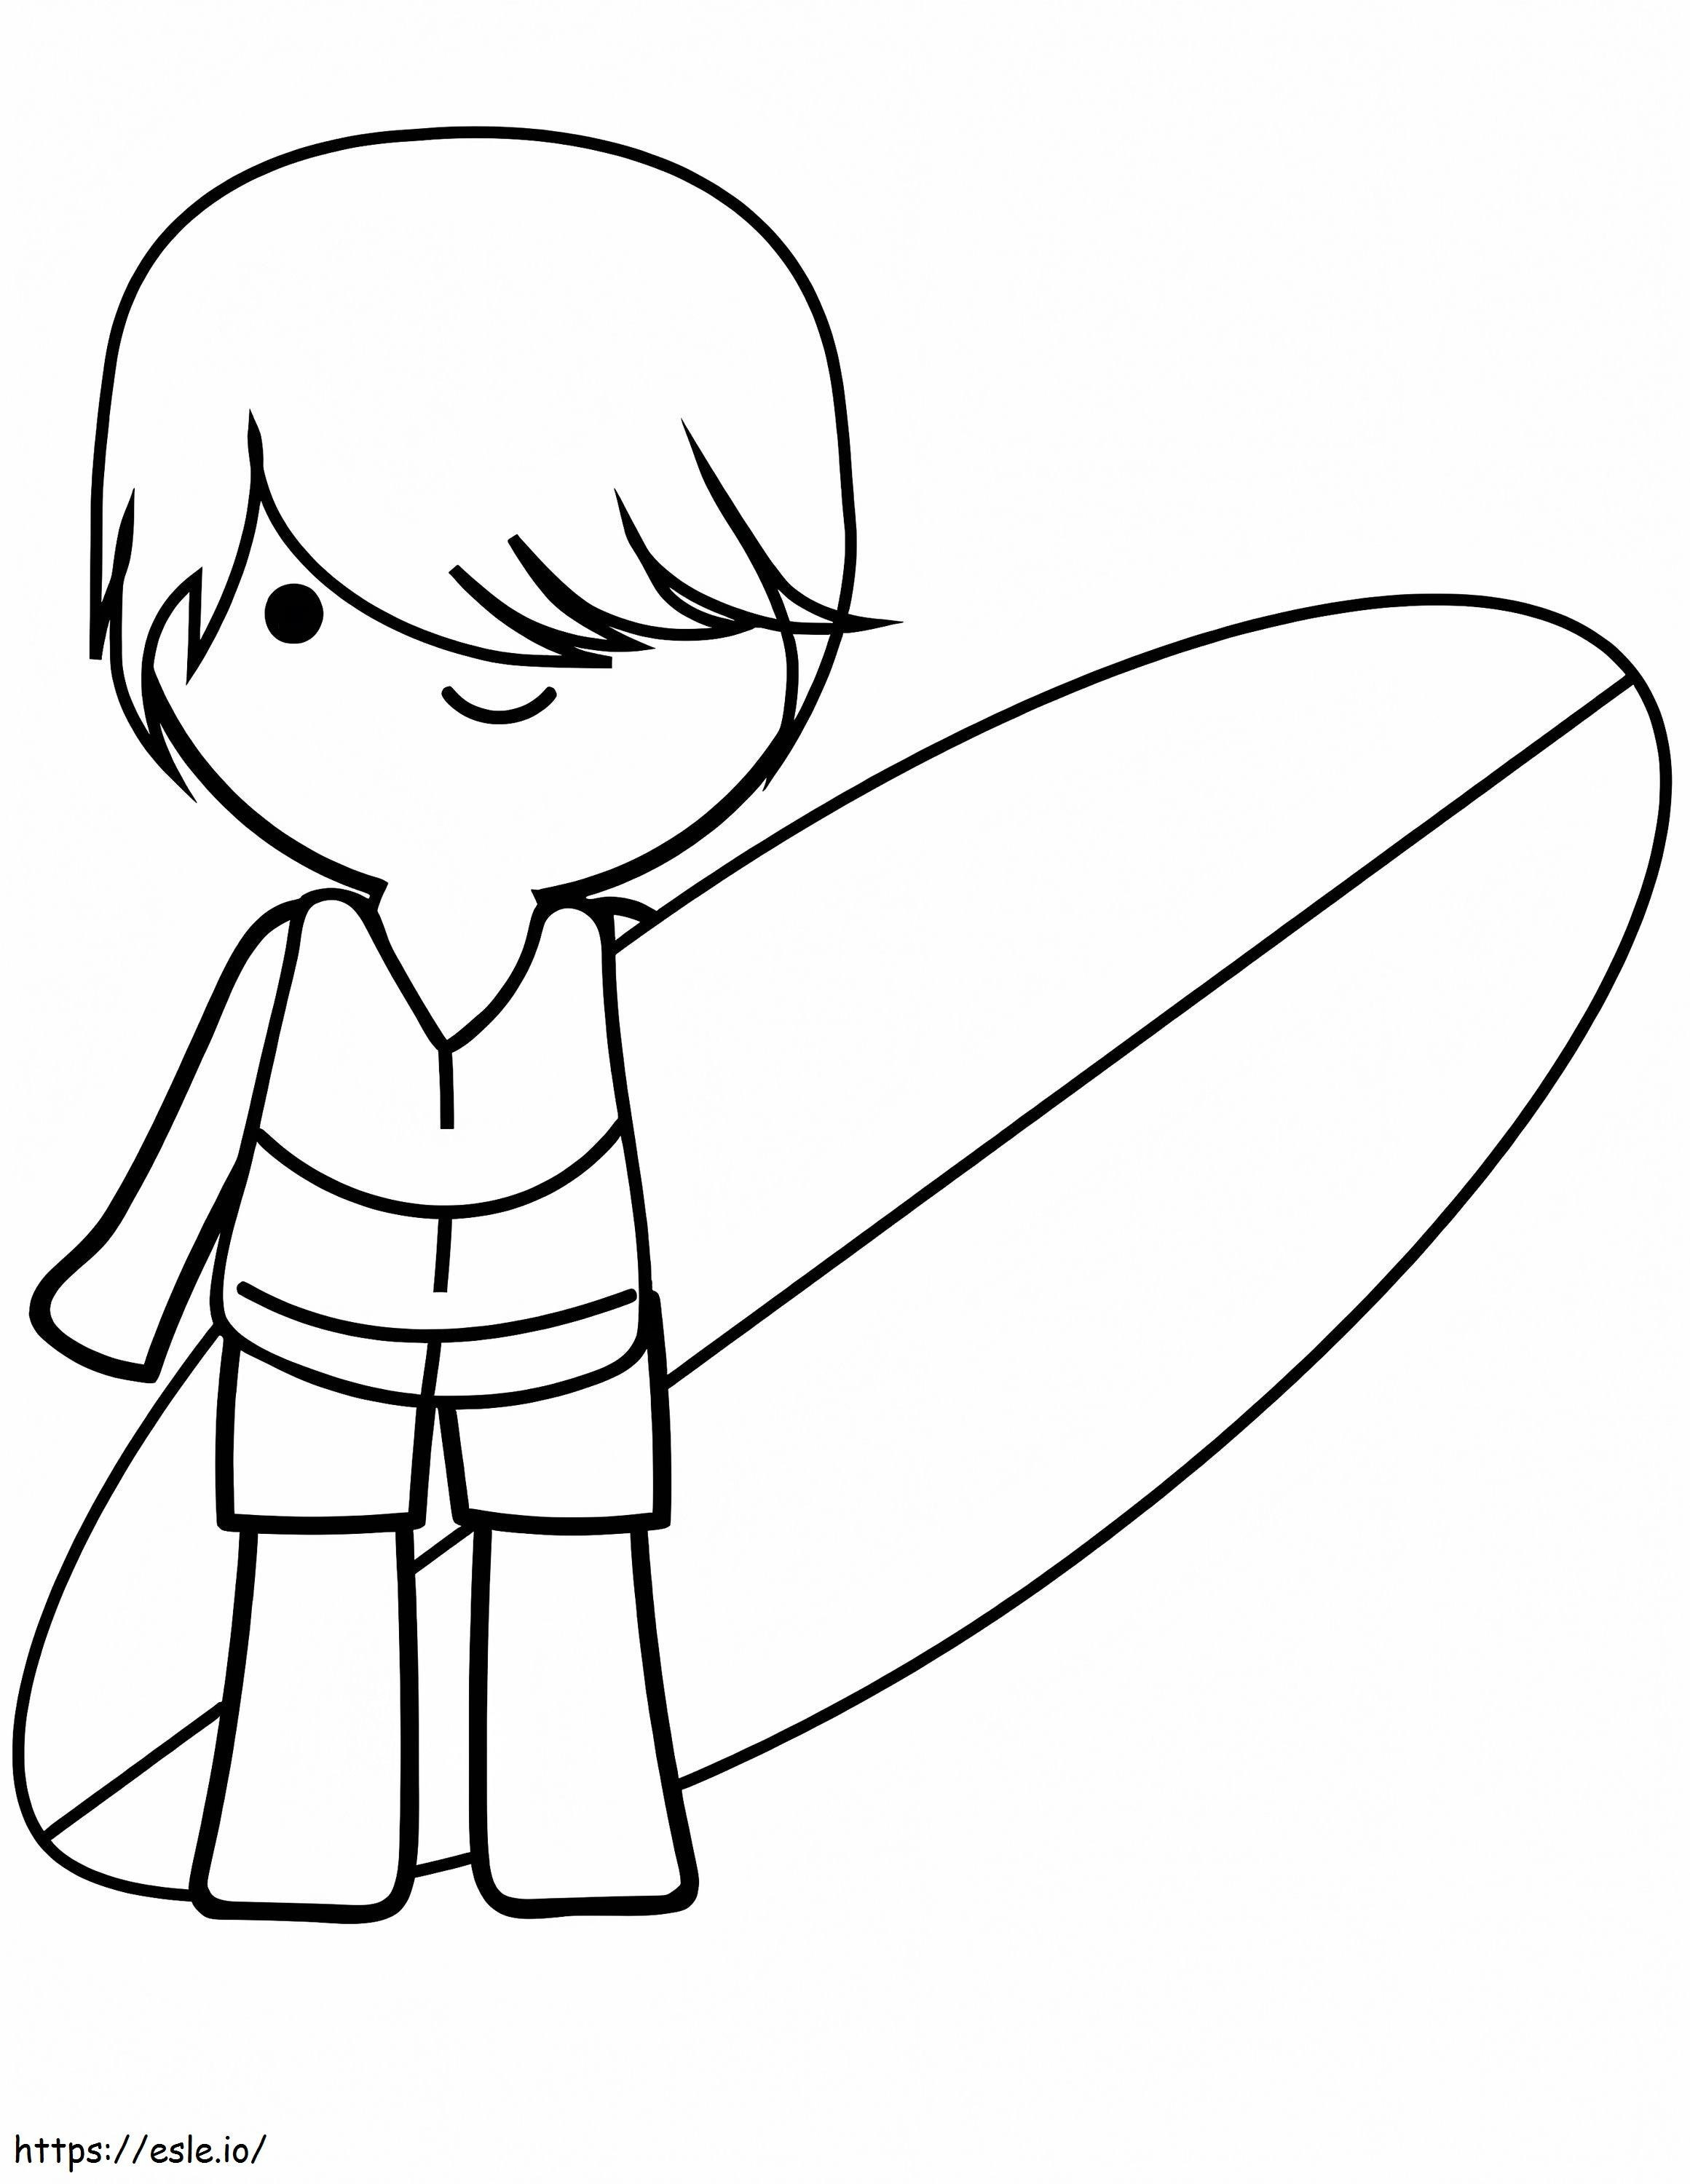 Boy With His Surfboard coloring page